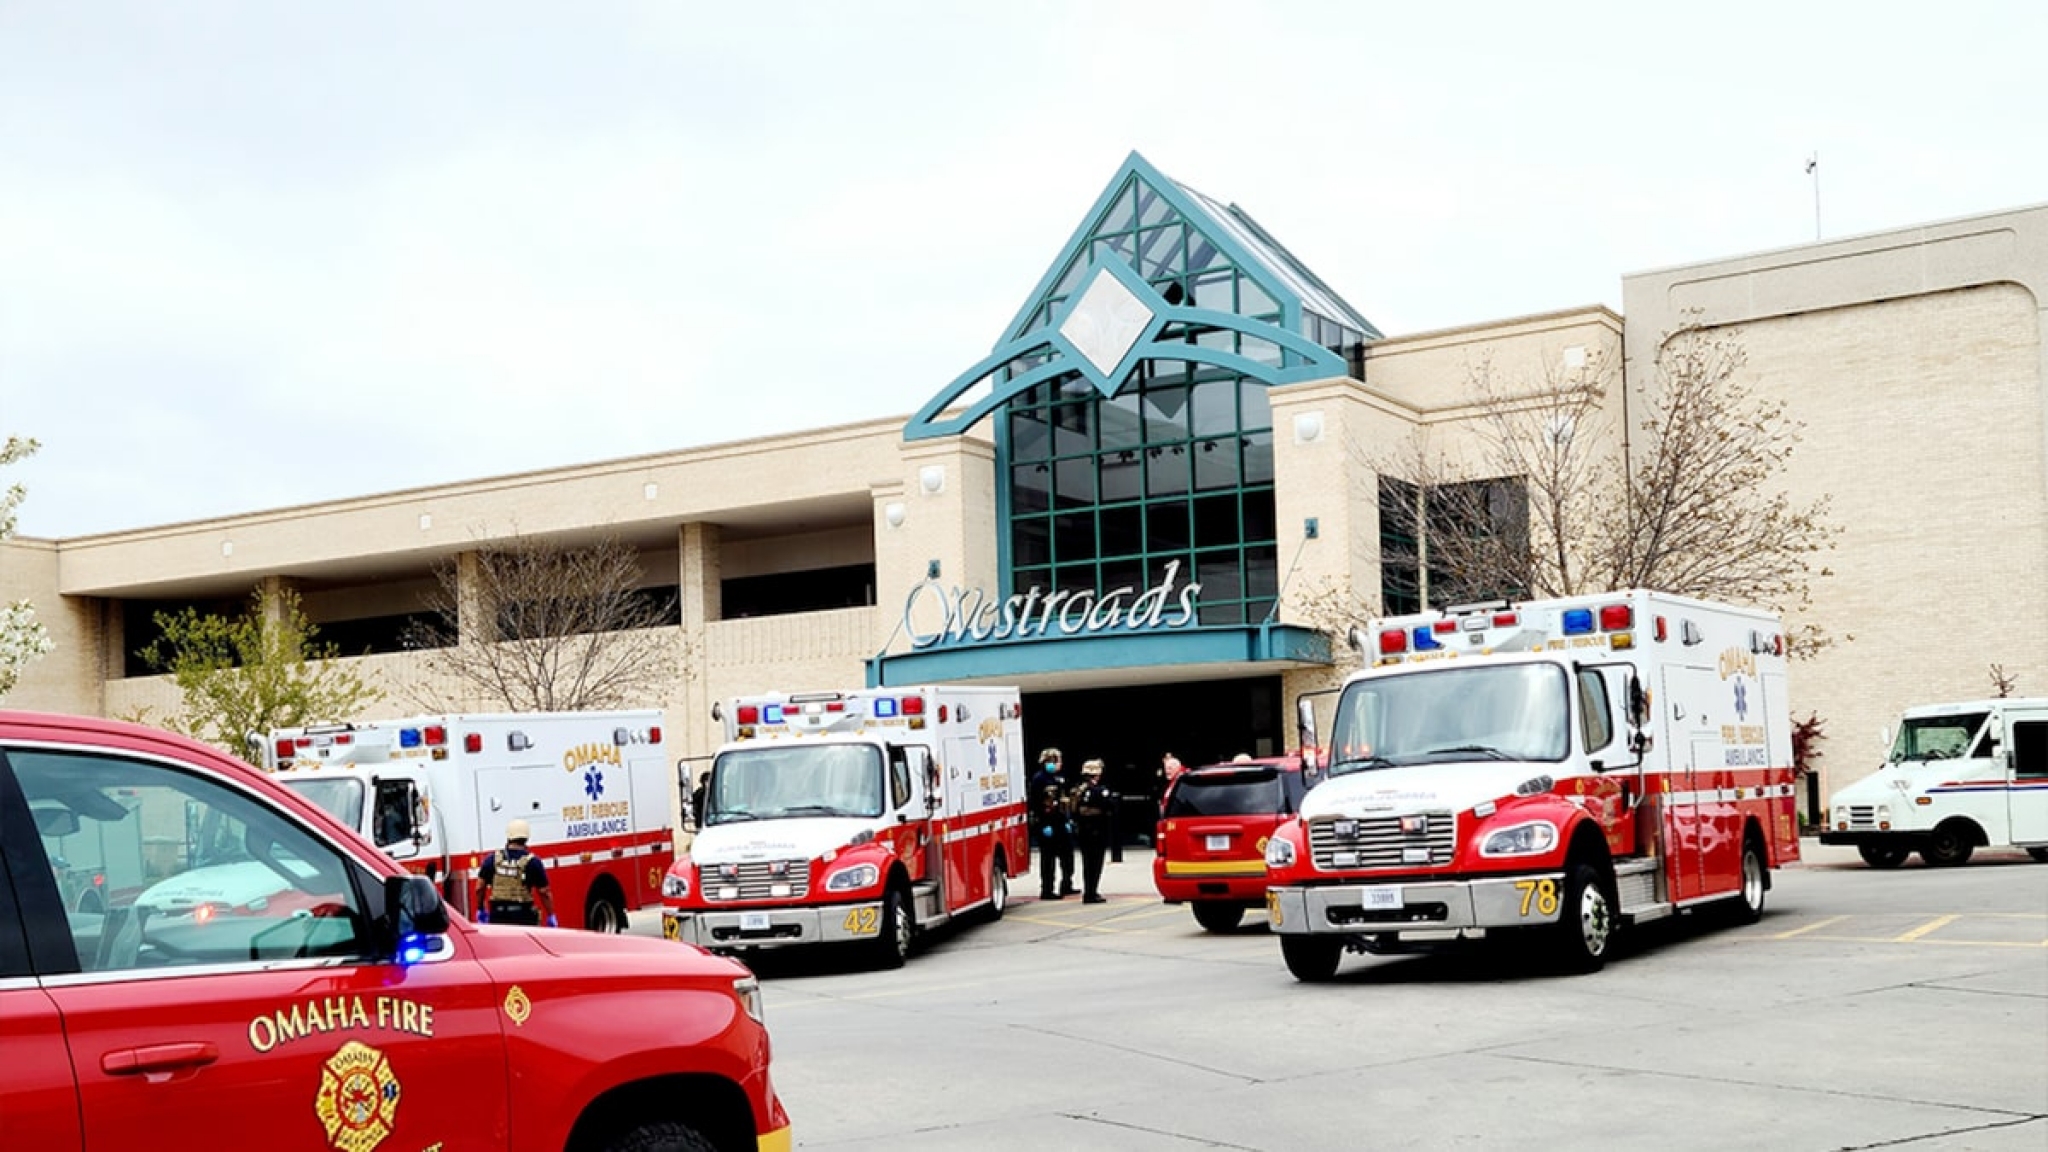 Police Respond to Reported Shooting at Nebraska Mall, One Left Dead